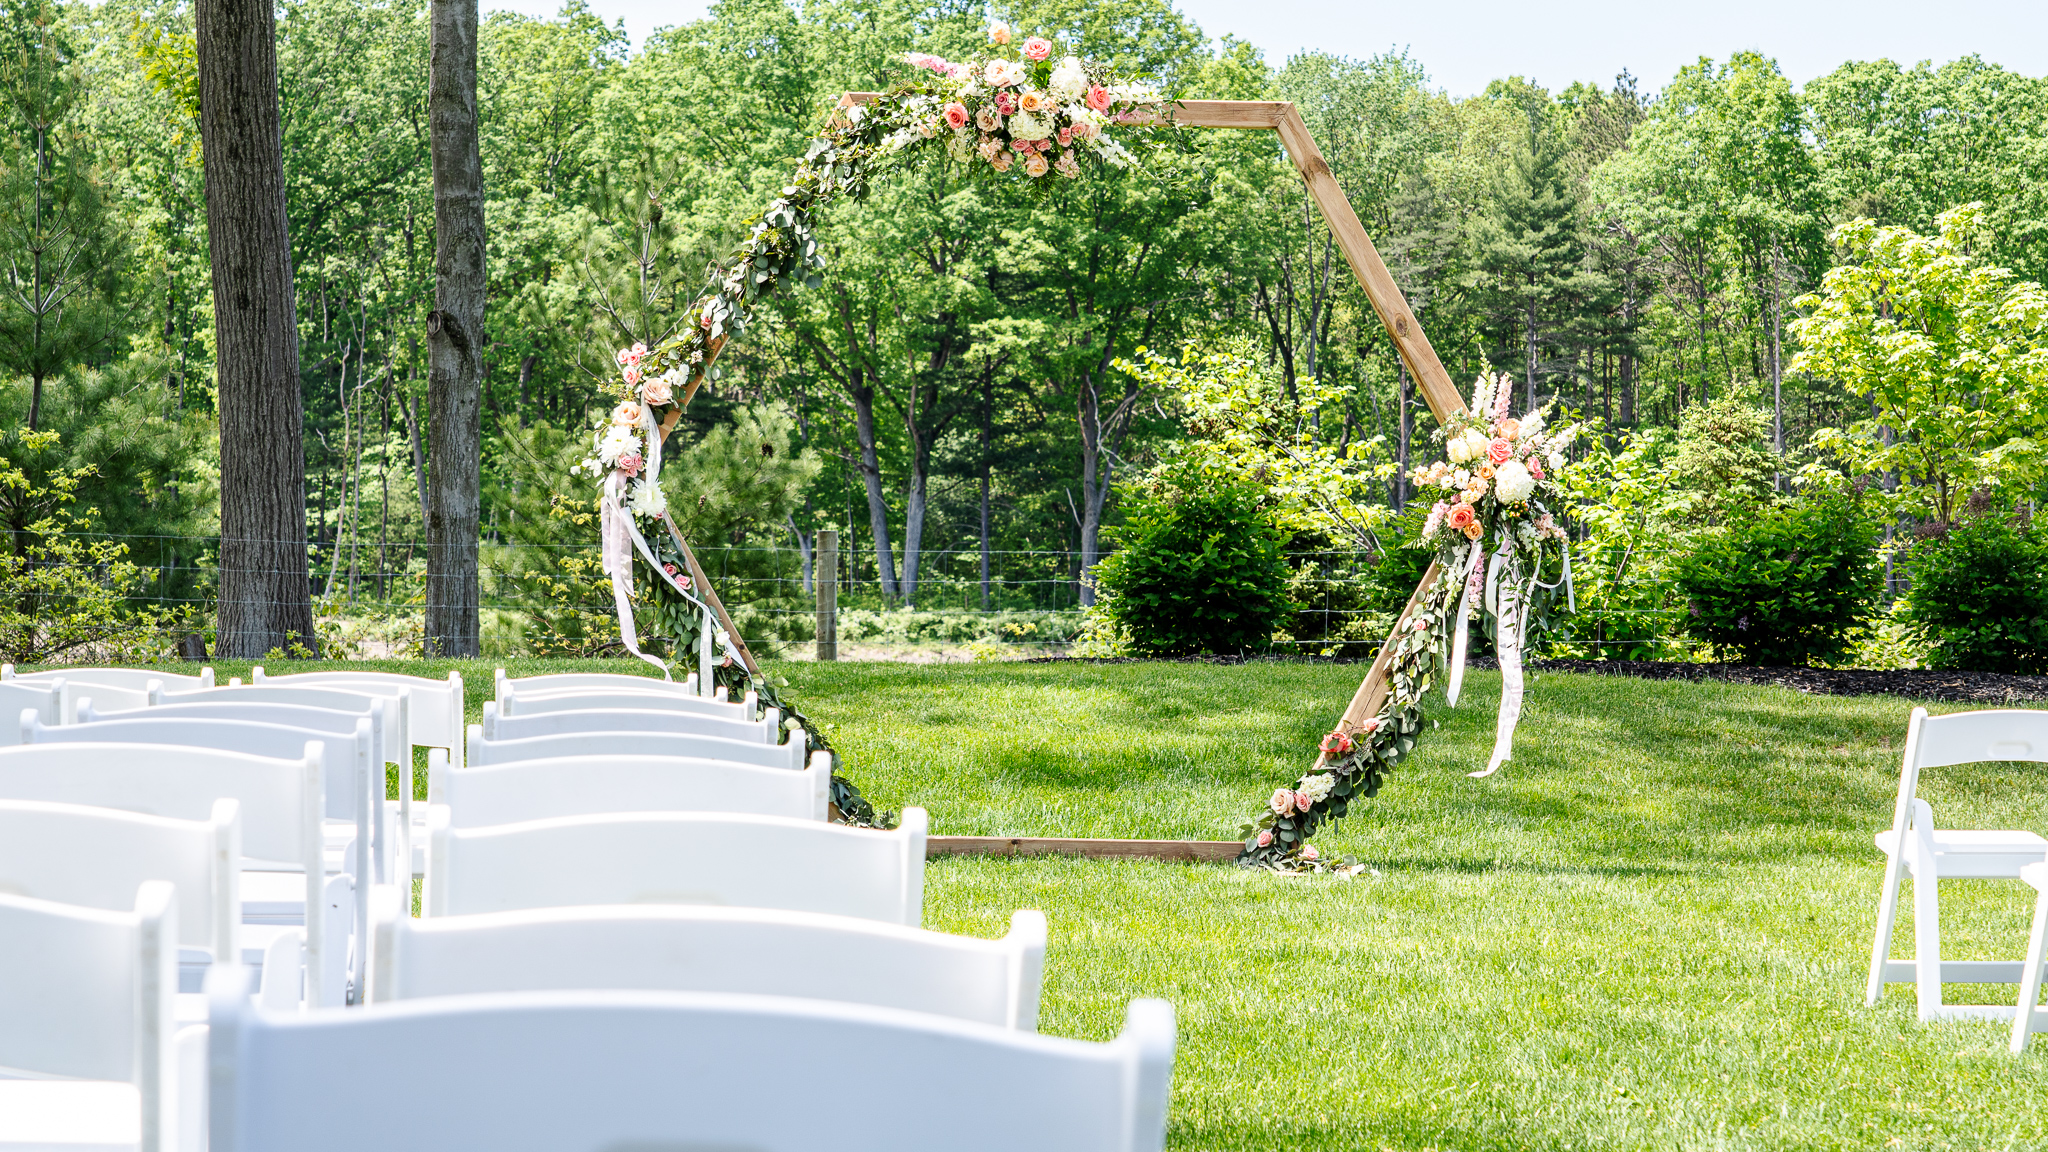 A wooden arche covered in flowers and sitting at the front of a arrangement of chairs.